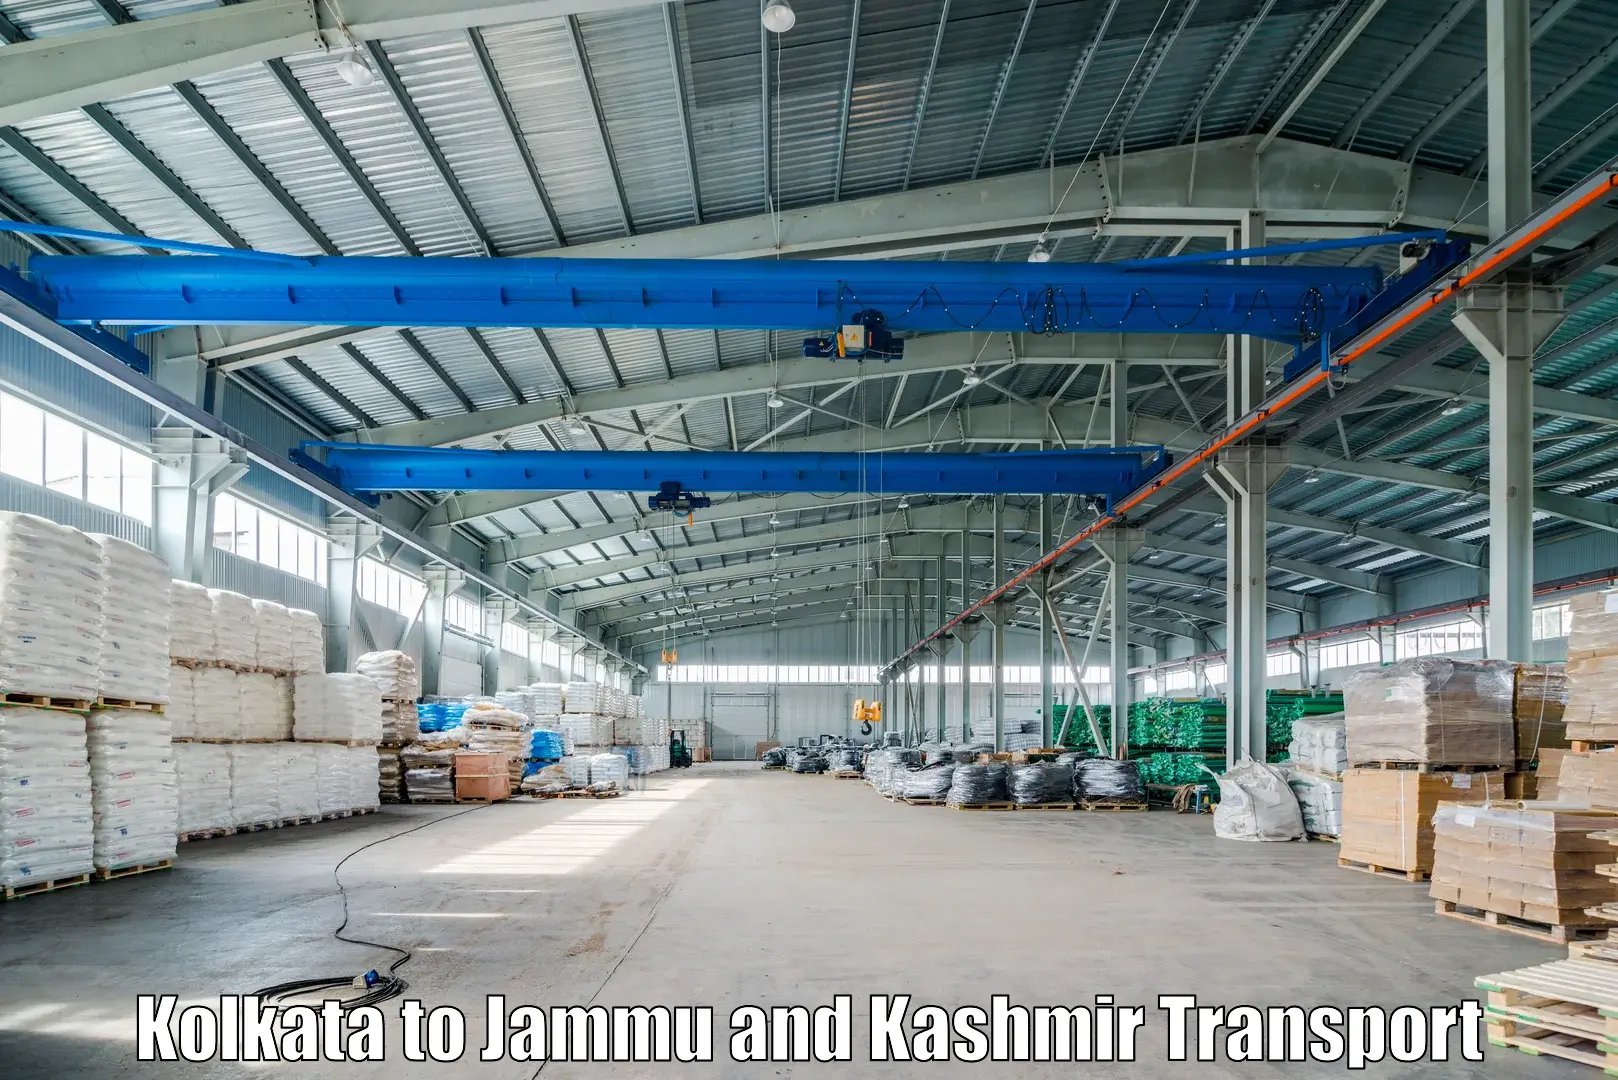 Transport bike from one state to another Kolkata to Jammu and Kashmir